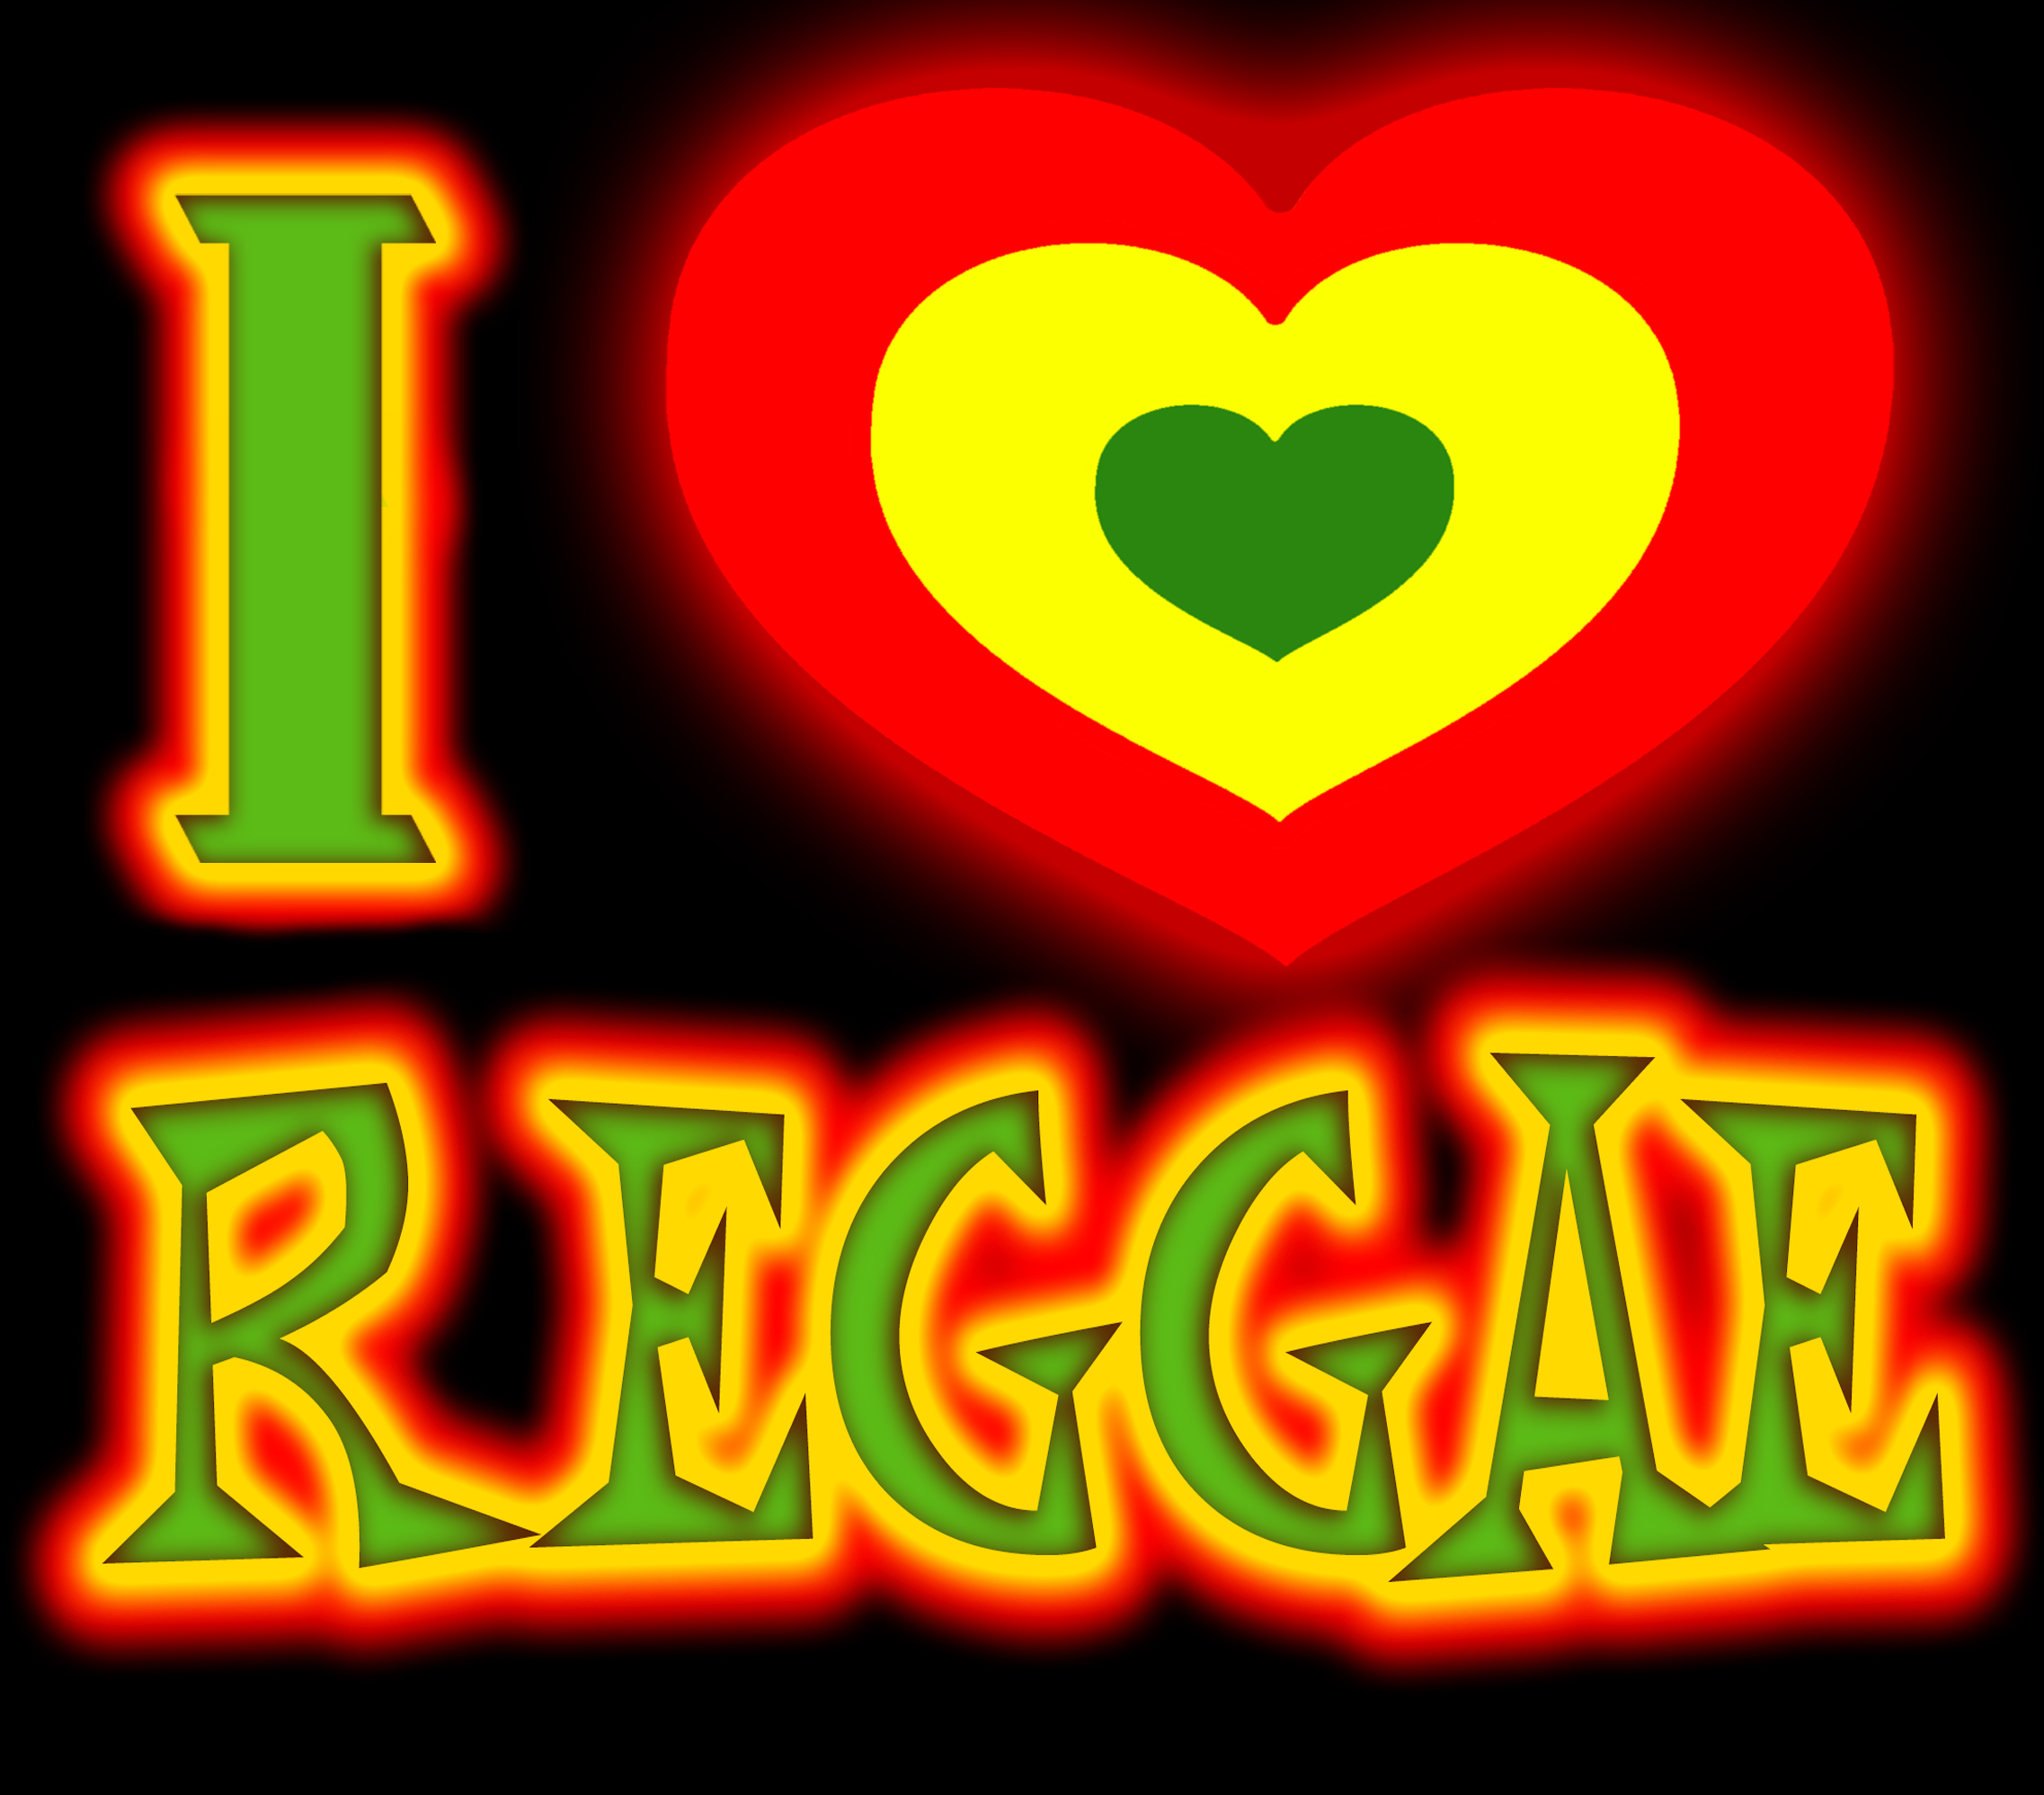 Free Reggae, Download Free Clip Art, Free Clip Art on Clipart Library2274 x 1997